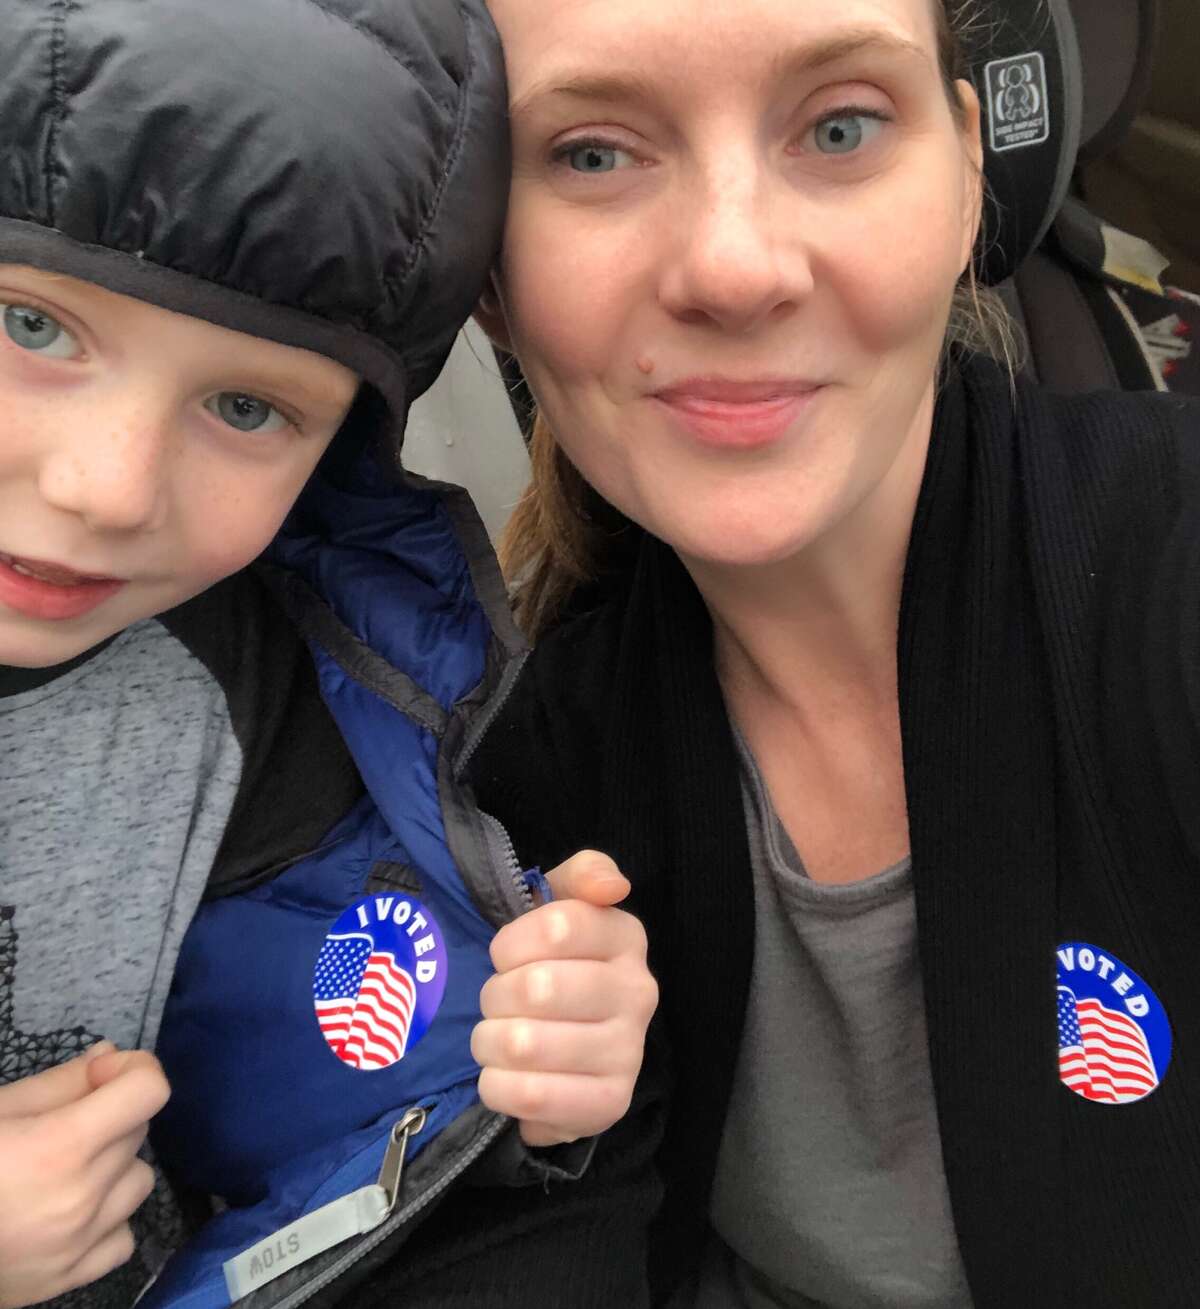 Readers share their 'I voted' selfies.